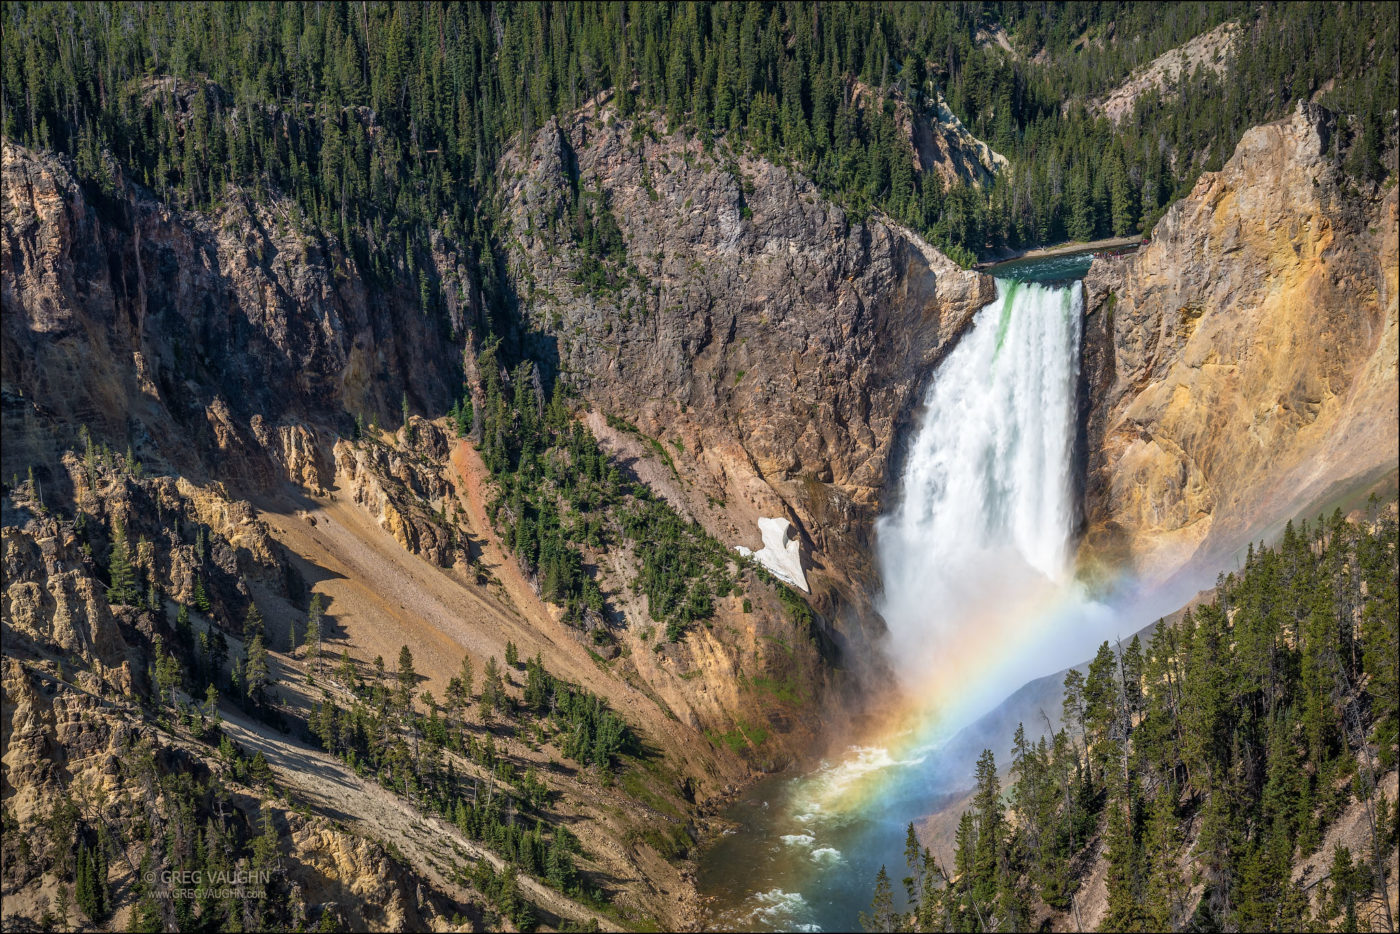 Rainbow at the base of Lower Falls on the Yellowstone River